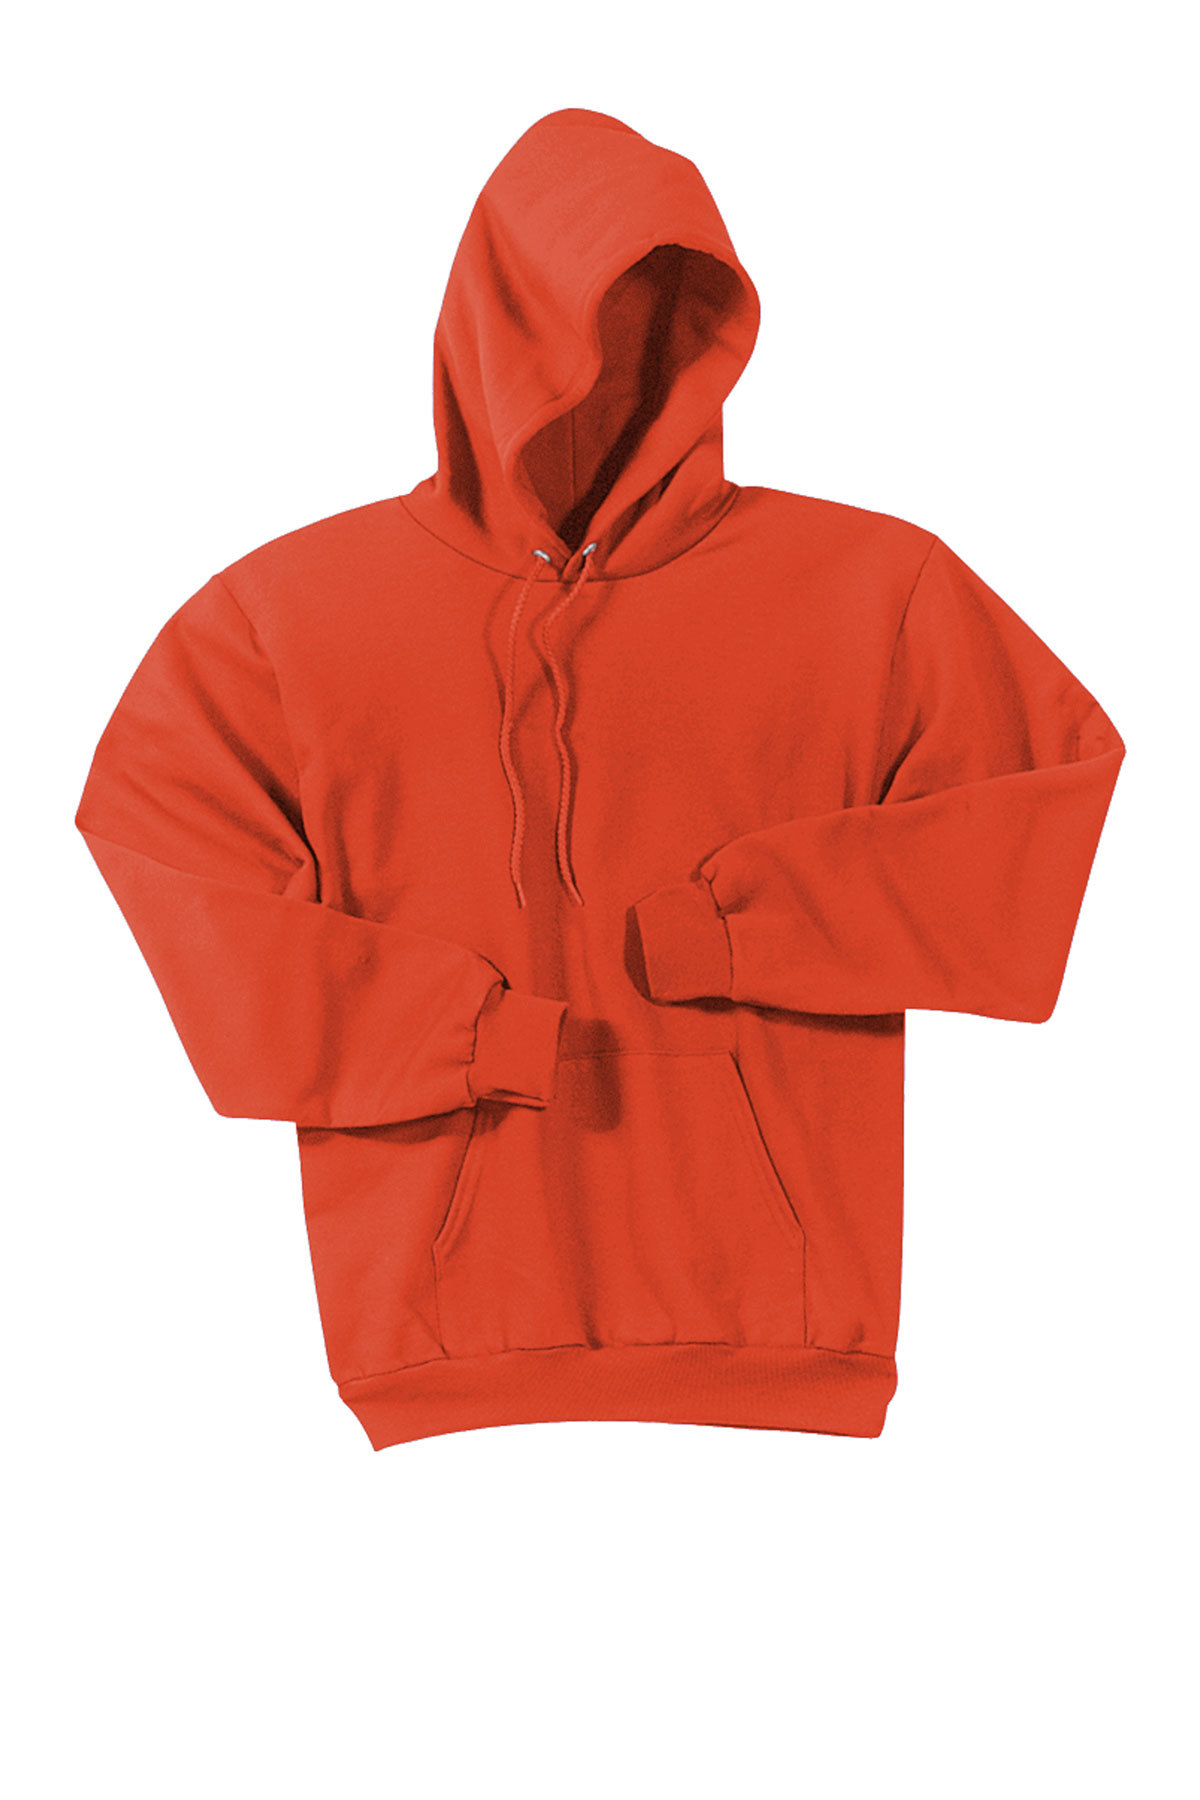 Port & Company Tall Essential Fleece Pullover Hooded Sweatshirt XLT Red